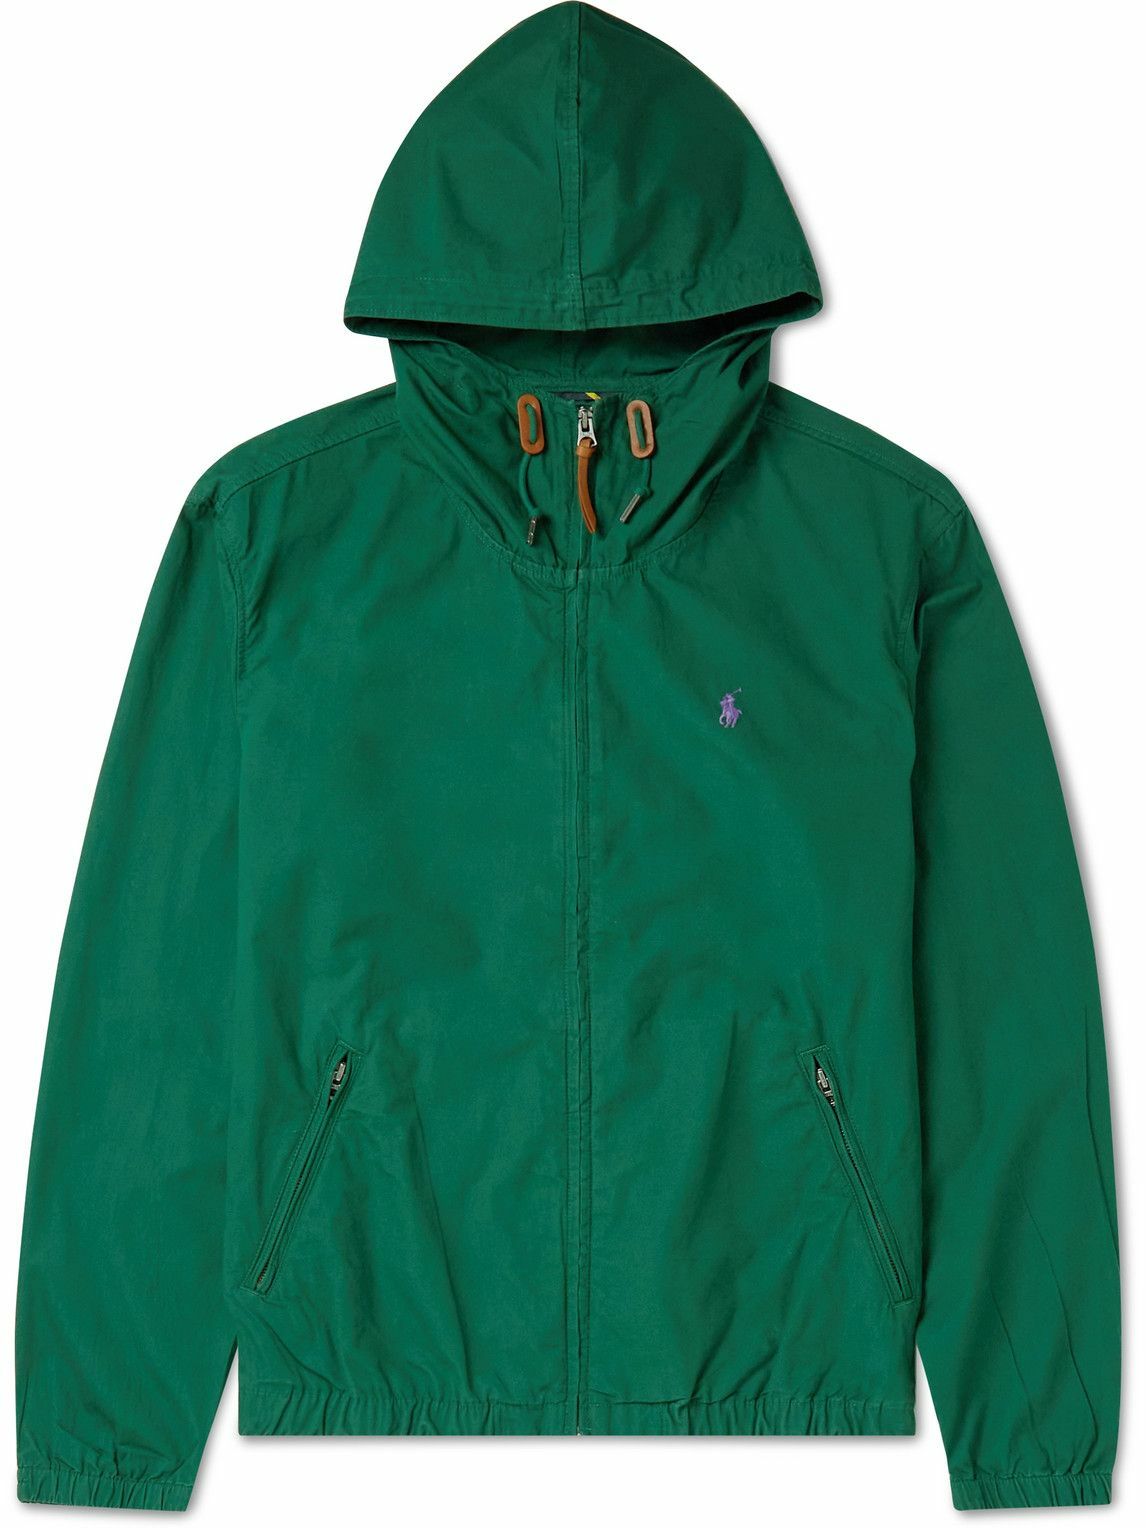 Polo Ralph Lauren - Logo-Embroidered Cotton Hooded Jacket - Green